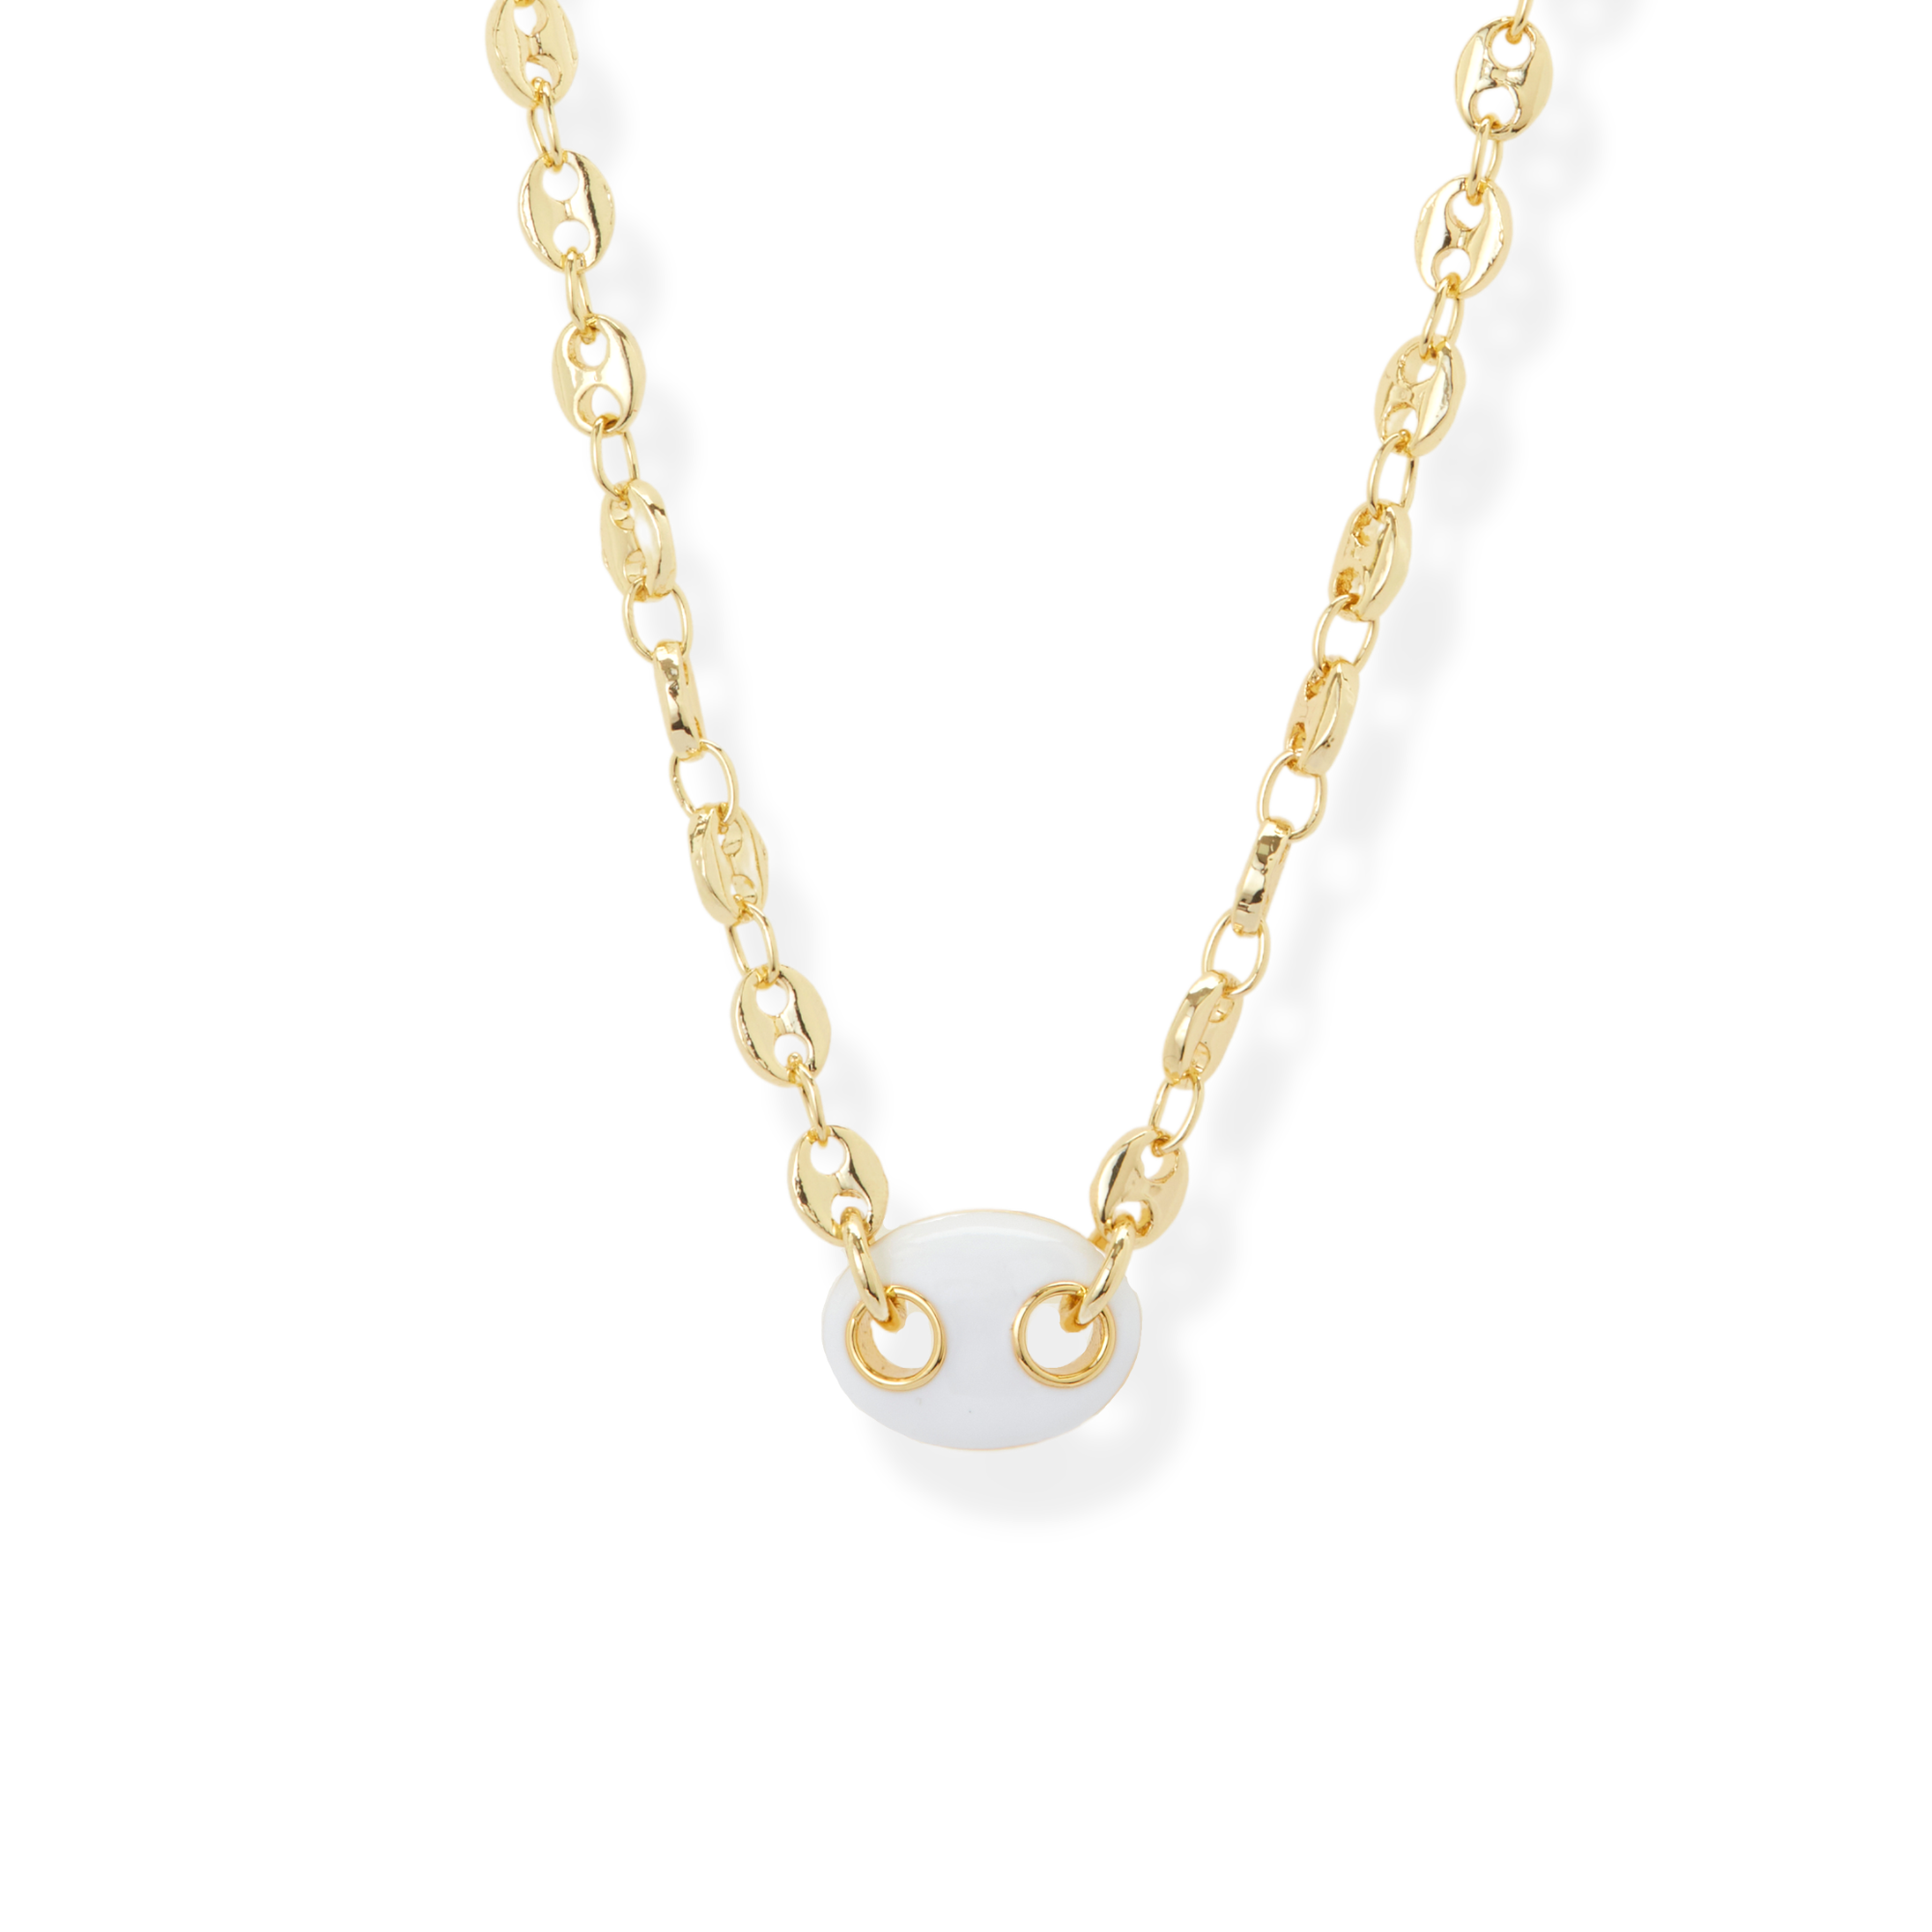 THE WHITE ENAMEL MARINER CHAIN NECKLACE